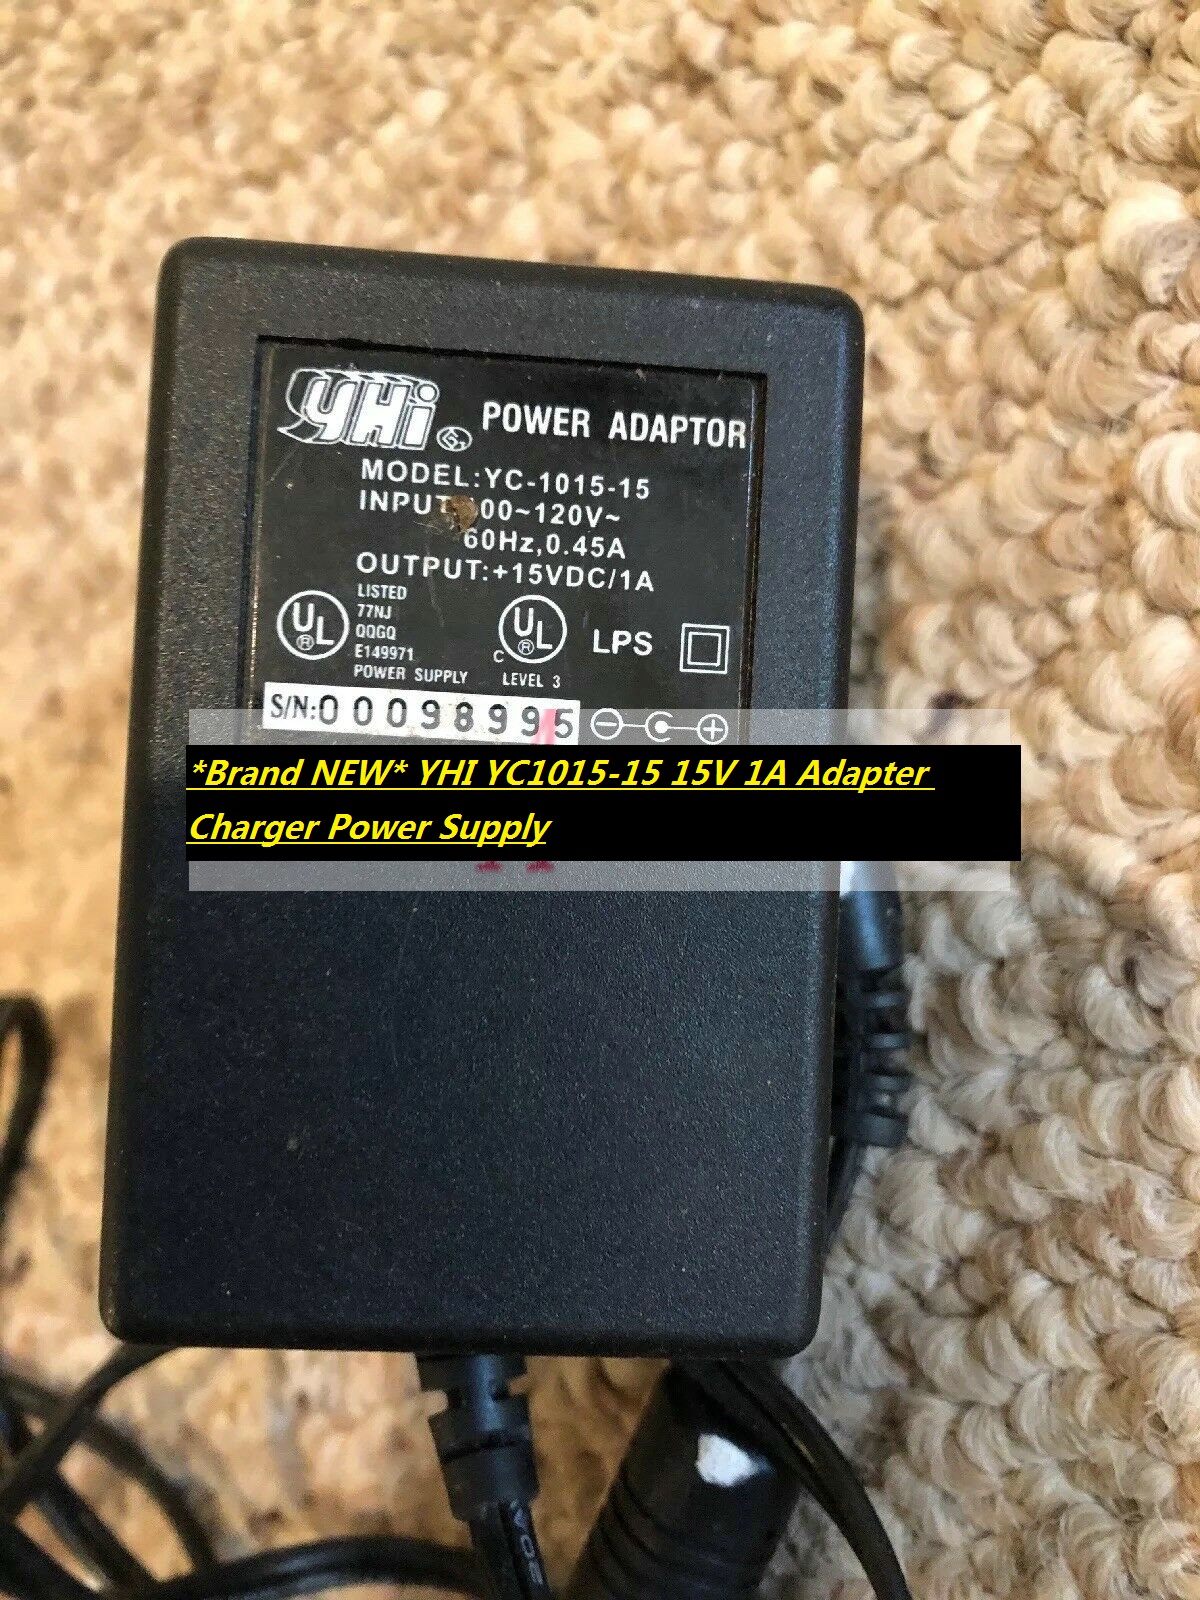 *Brand NEW* YHI YC1015-15 15V 1A Adapter Charger Power Supply